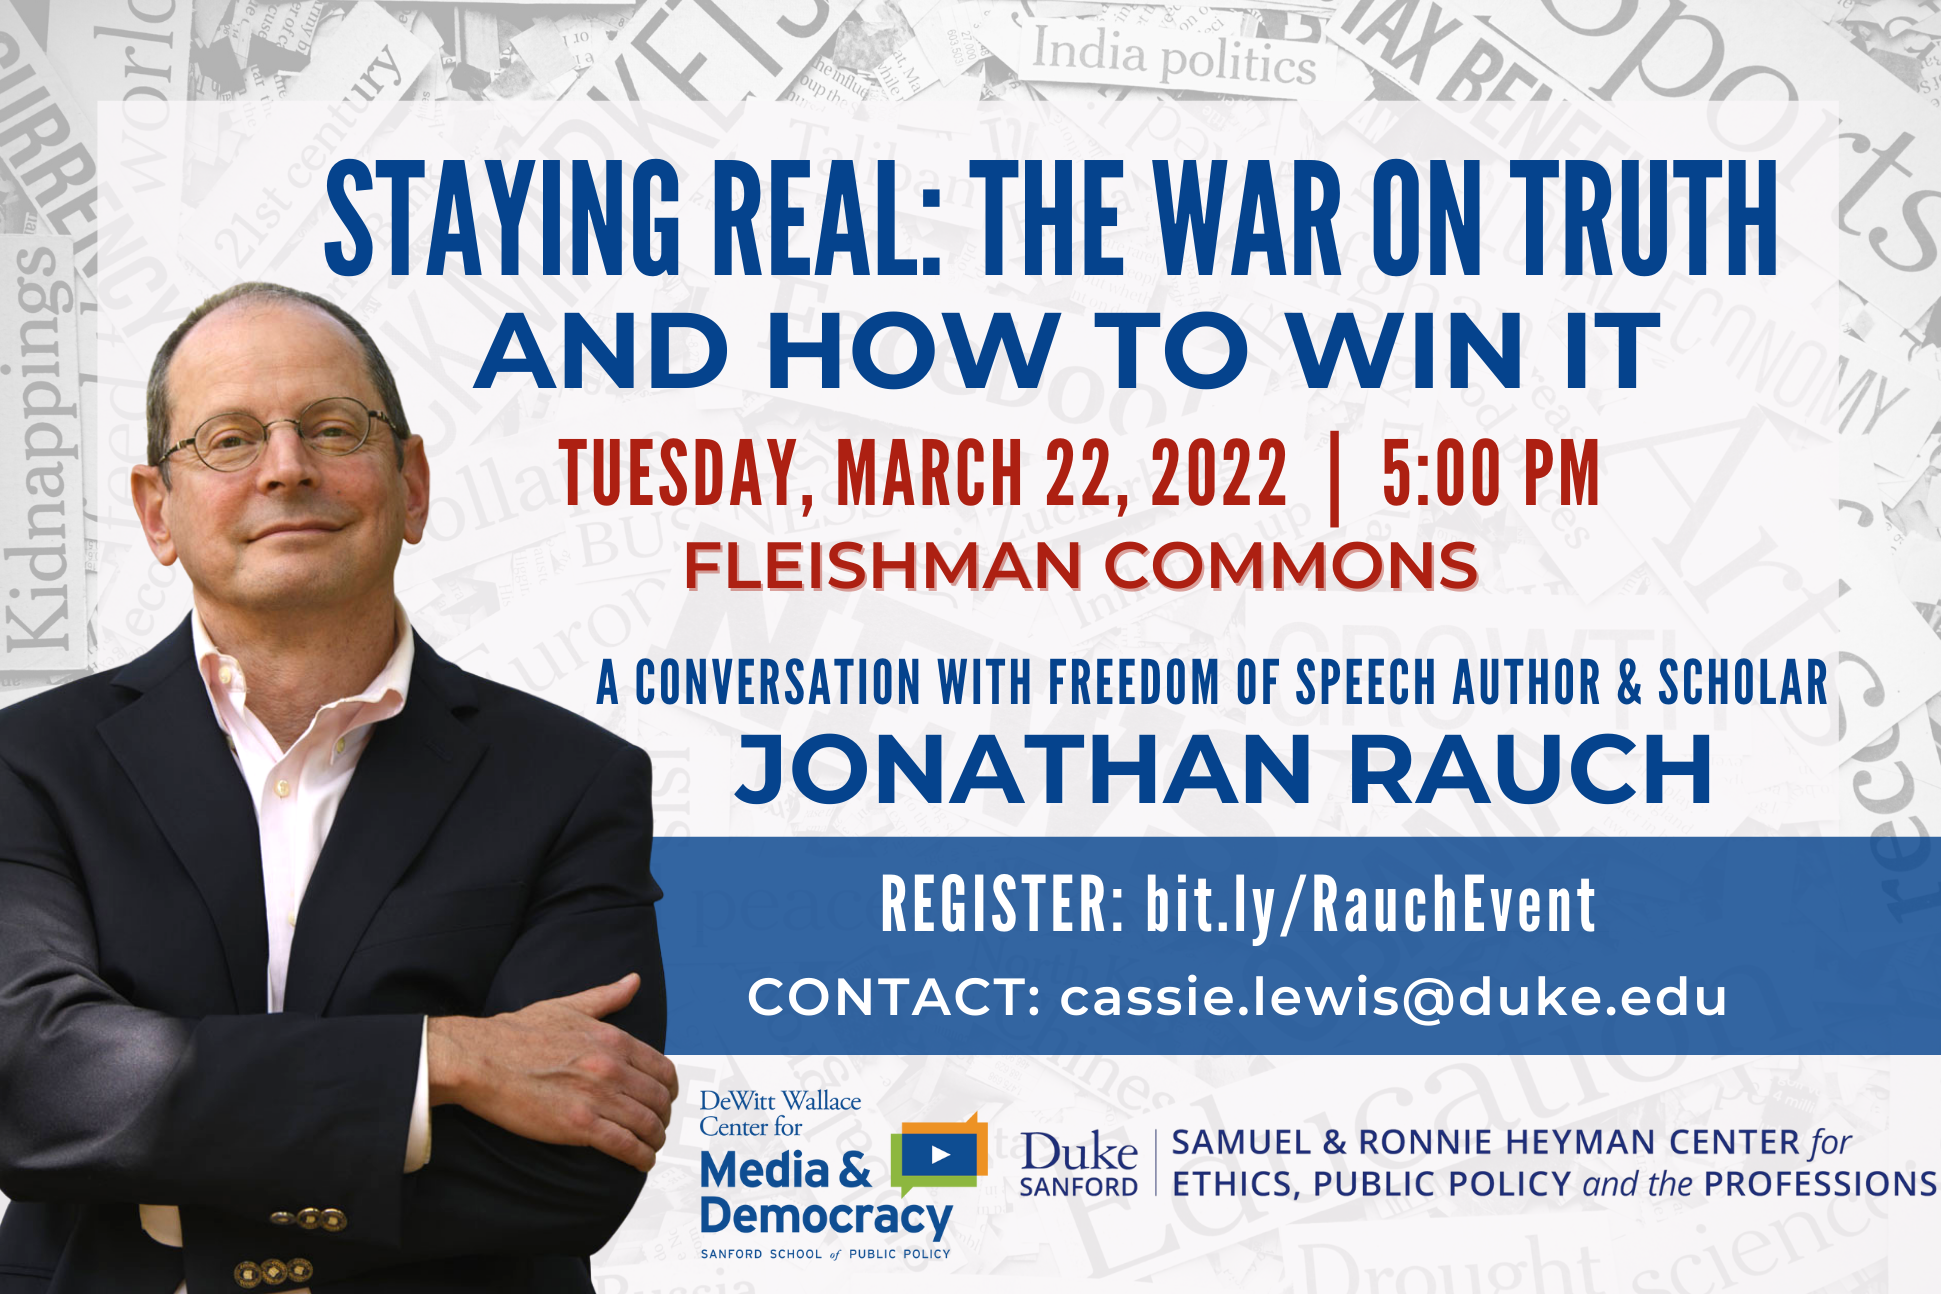 Freedom of Speech Author and Scholar, Jonathan Rauch, will be giving a keynote speech in the Sanford School of Public Policy on Tuesday, March 22nd at 5pm in the Fleishman Commons, Ground floor of the Sanford Bldg.